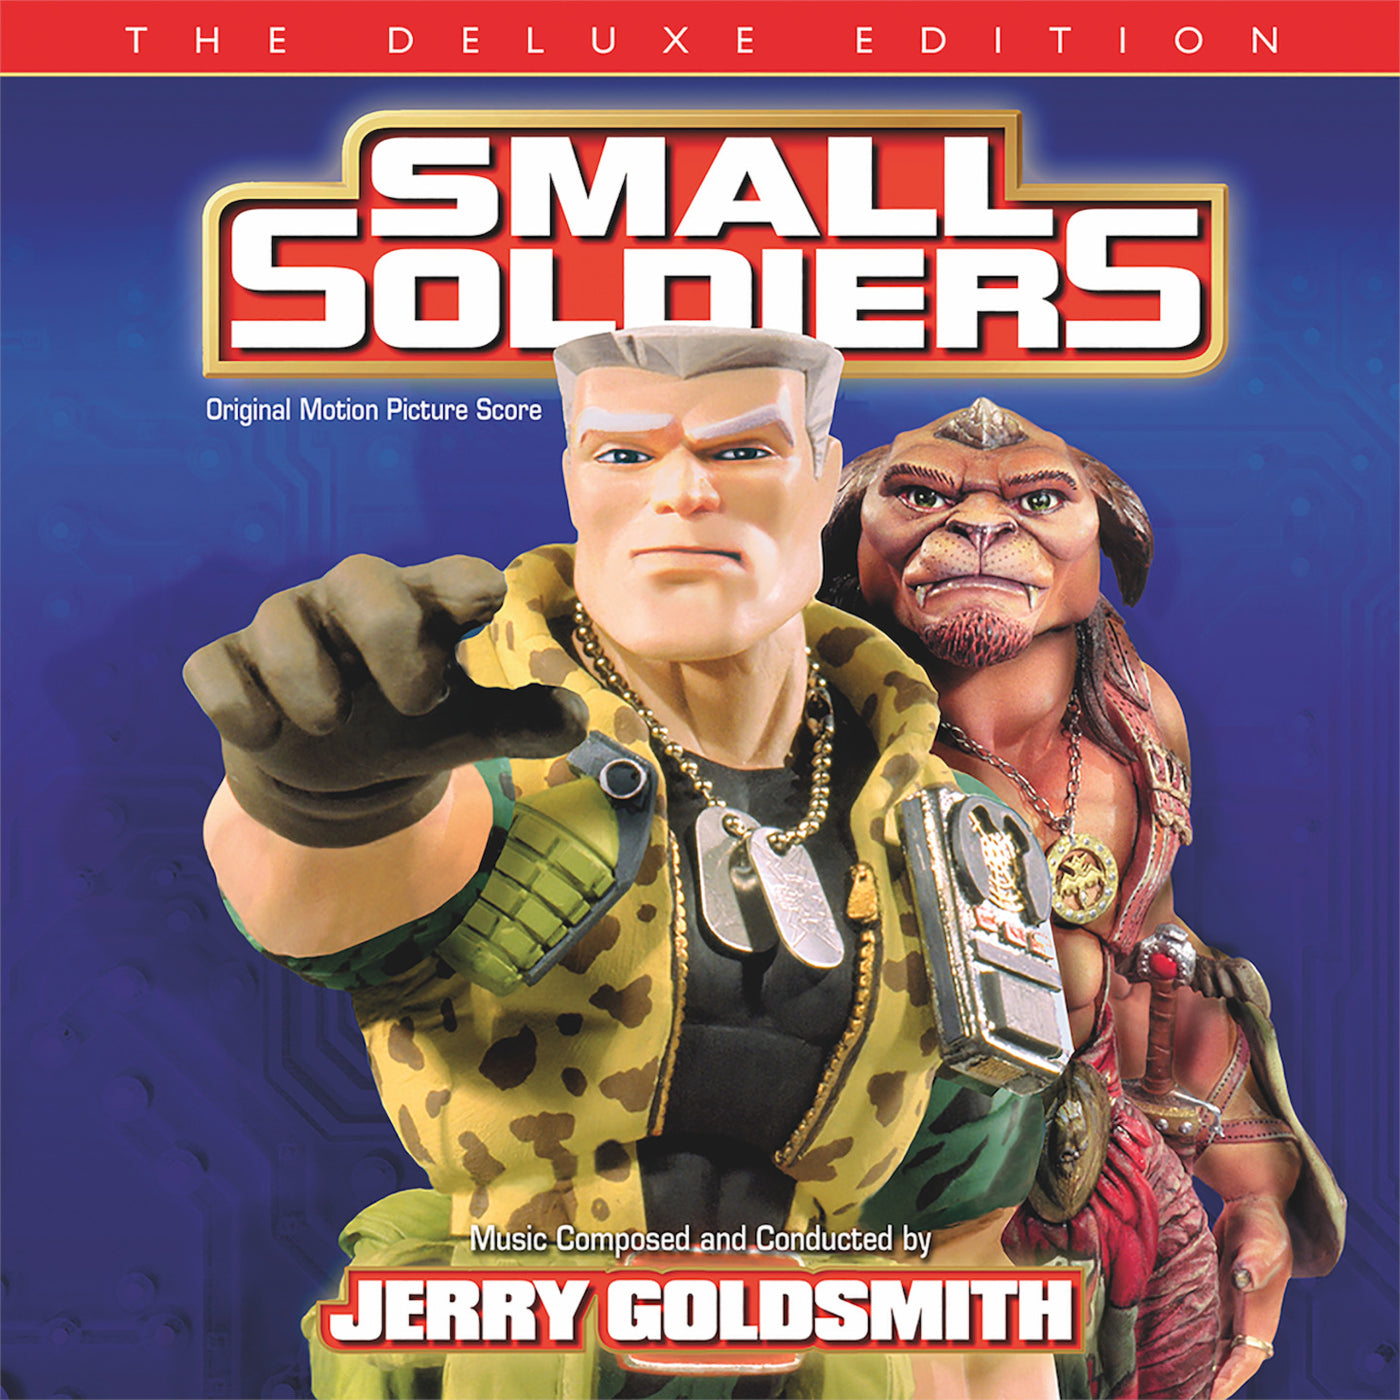 Small Soldiers: The Deluxe Edition (Digital Album)